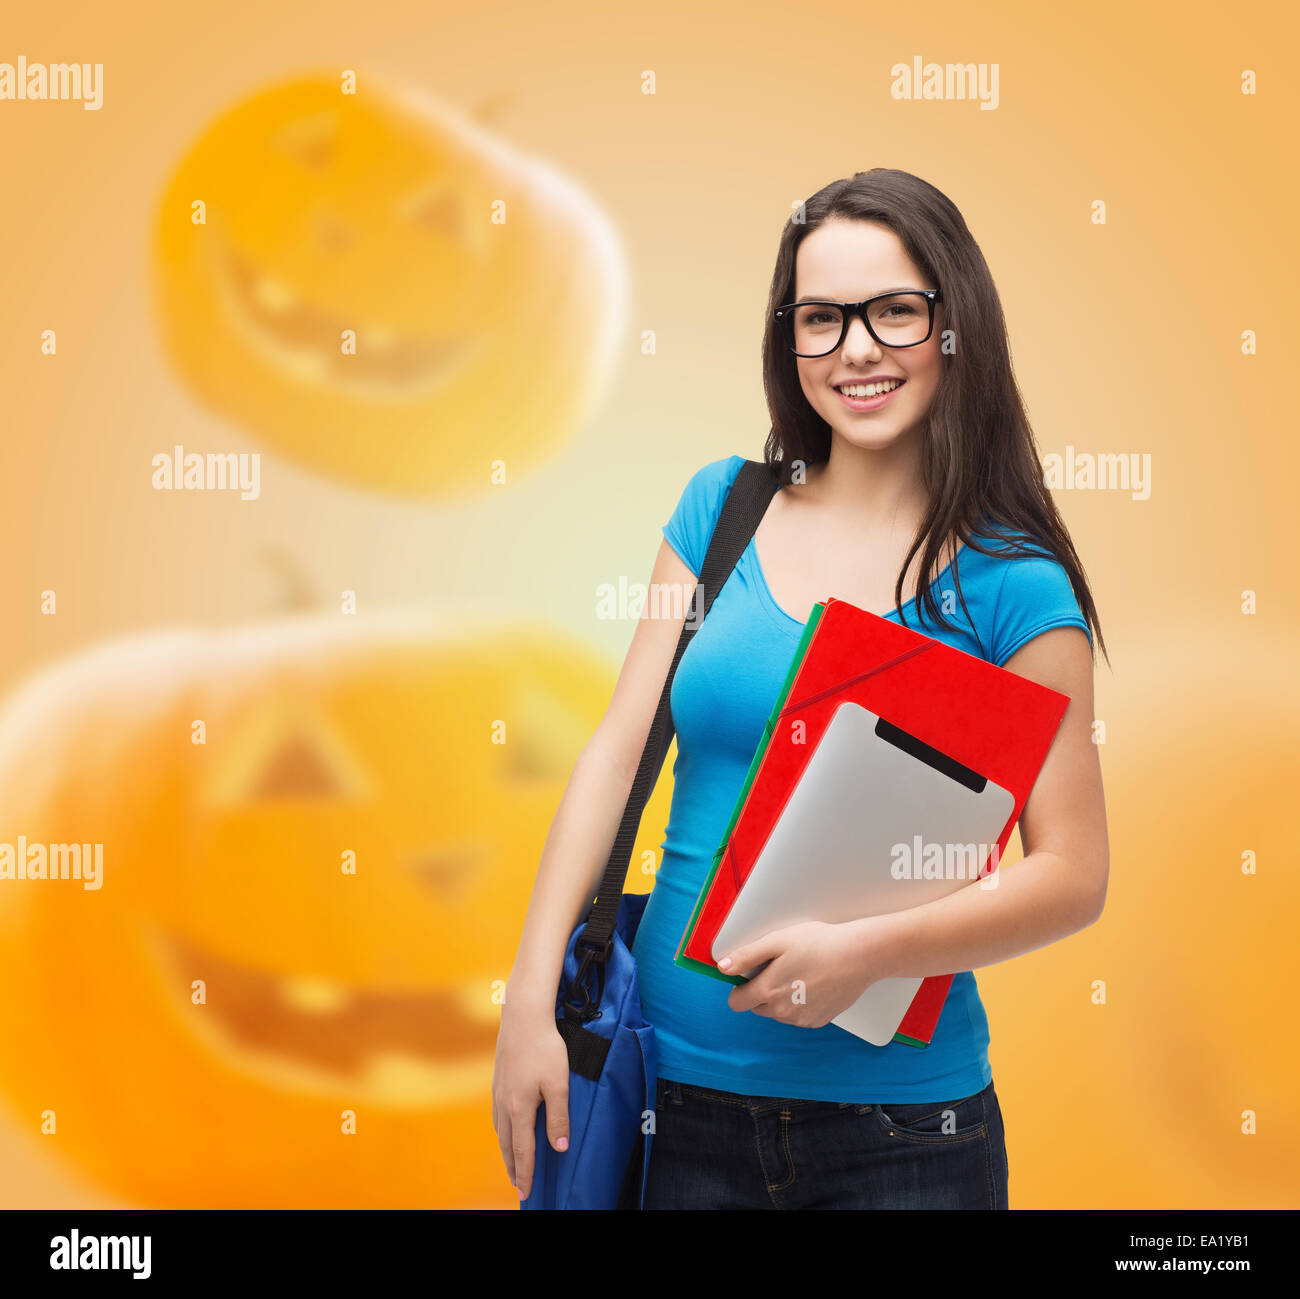 smiling student girl with books and bag Stock Photo